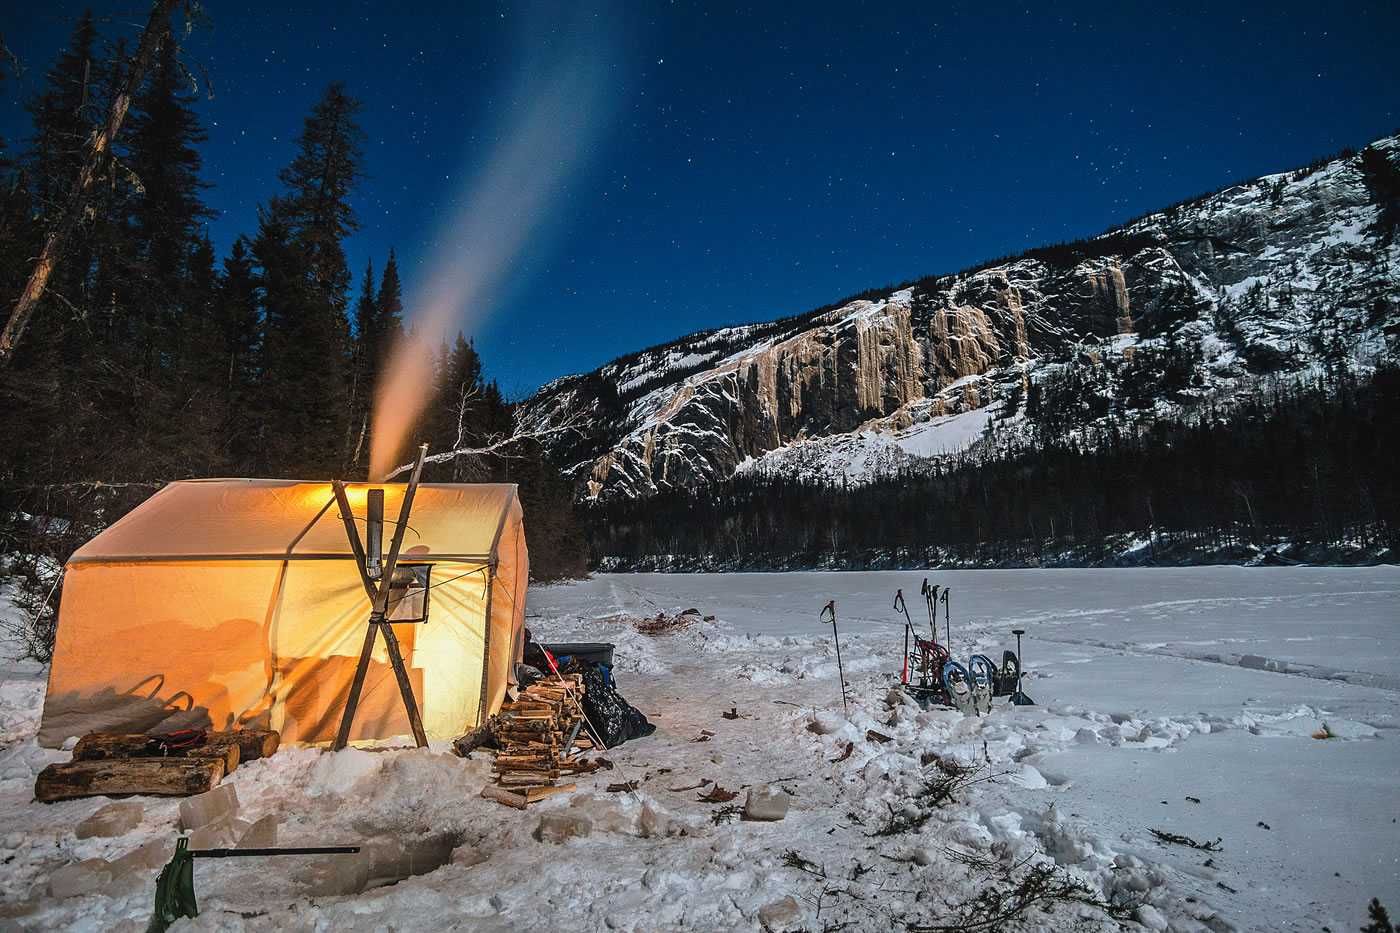 Base camp on the frozen Nipissis River below the M51 cliff, in Nitassinan, the Innu name for this land that overlaps with northeastern Quebec. [Photo] Maarten van Haeren